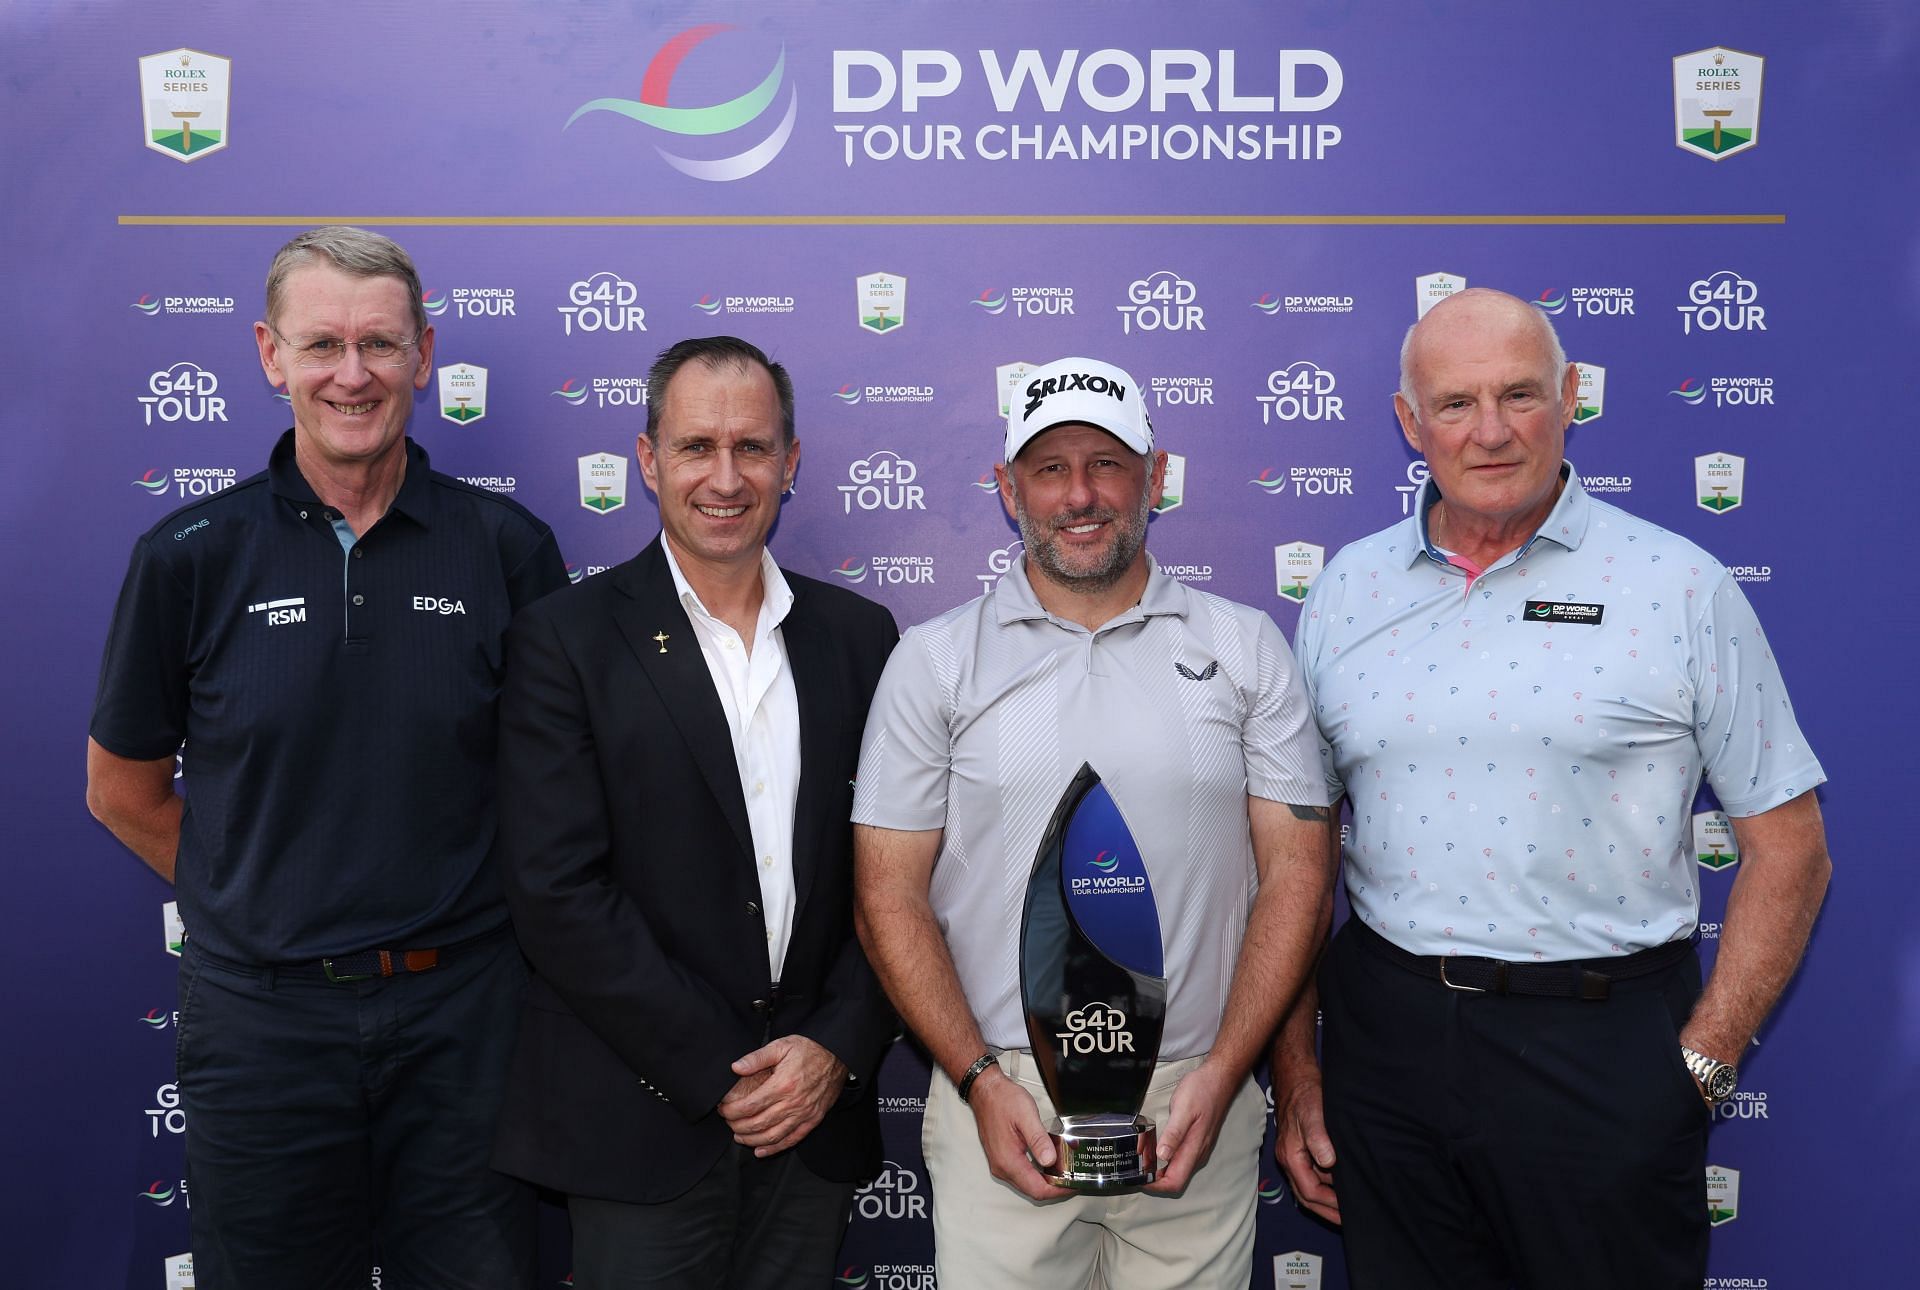 Mike Browne of England celebrates with the G4D trophy alongside Tony Bennett, President of Edga and Head of Disability and Inclusion for the IGF, Daniel Van Otterdijk, Group Chief Communications Officer of DP World and Eric Nicoli, Chairman of PGA European Tour Group, following the G4D Tour season finale (Image via Getty)